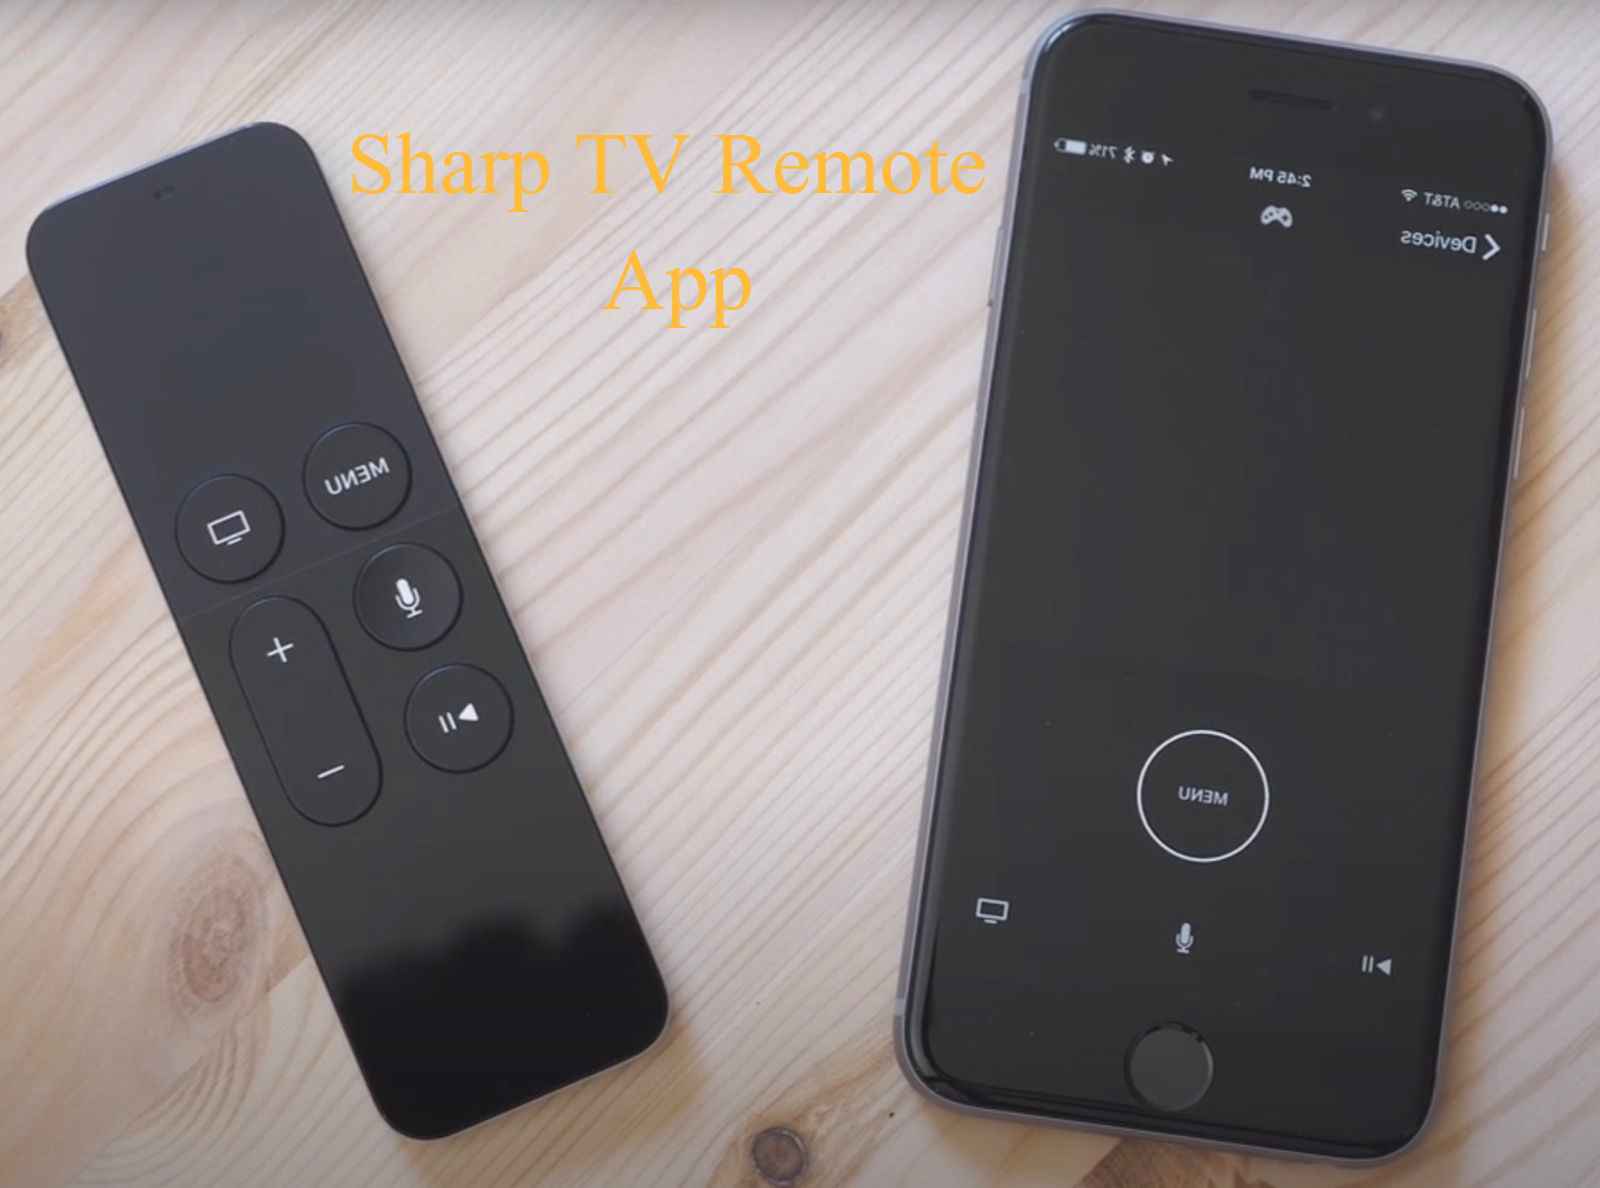 Sharp TV Remote App: Features and Installation 2022